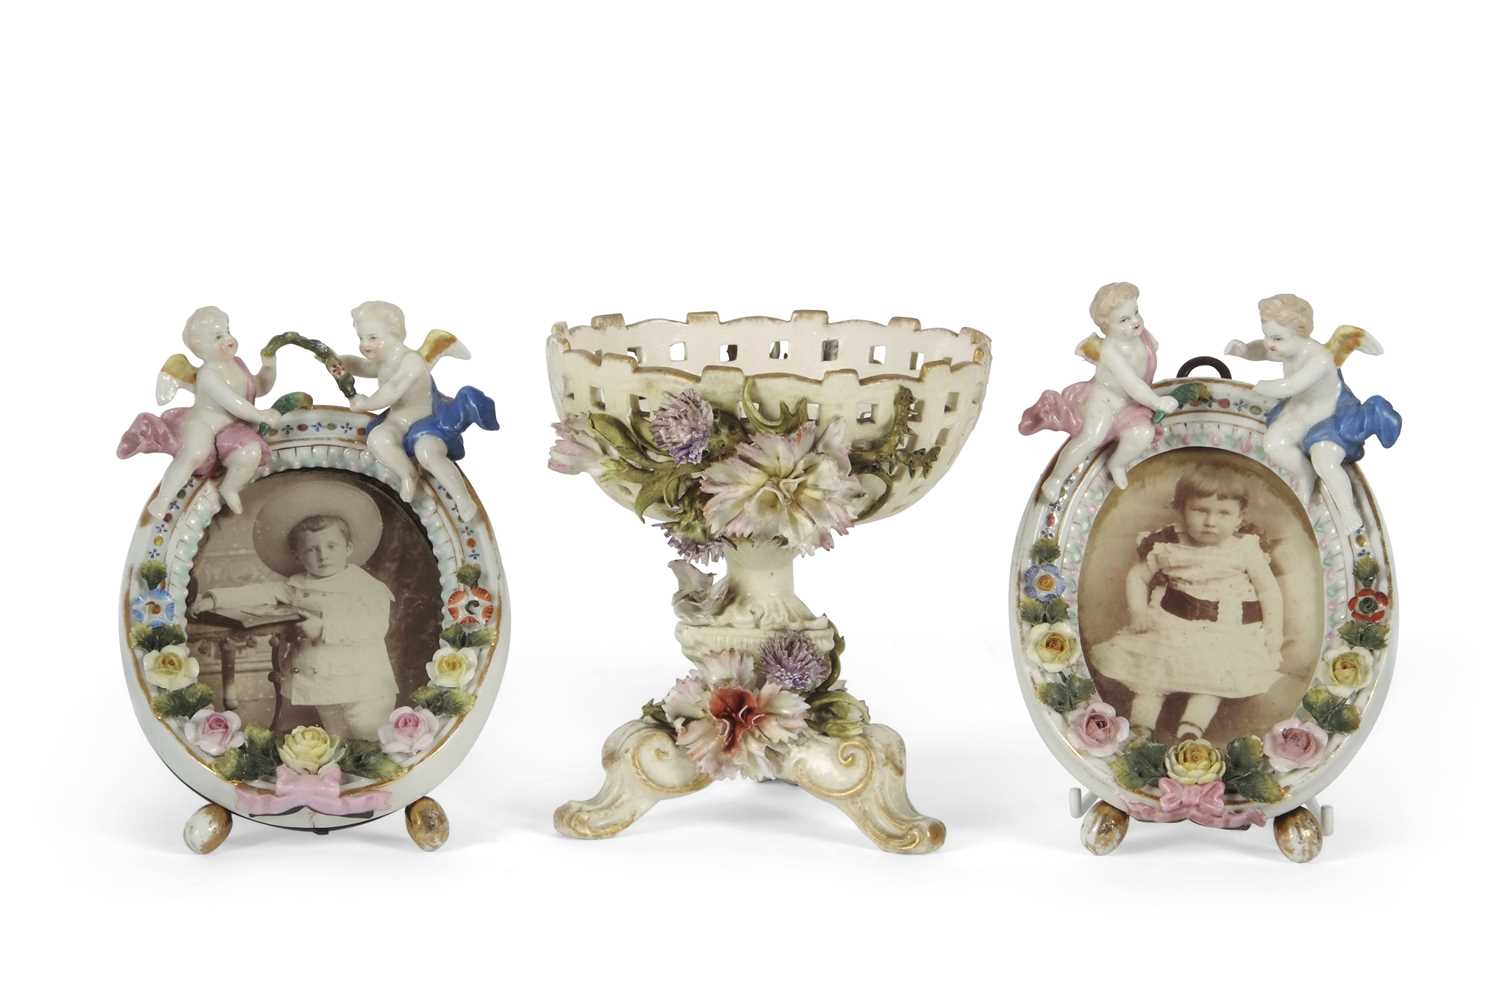 A small Sitzendorf basket with applied decoration of flowers, together with two small porcelain